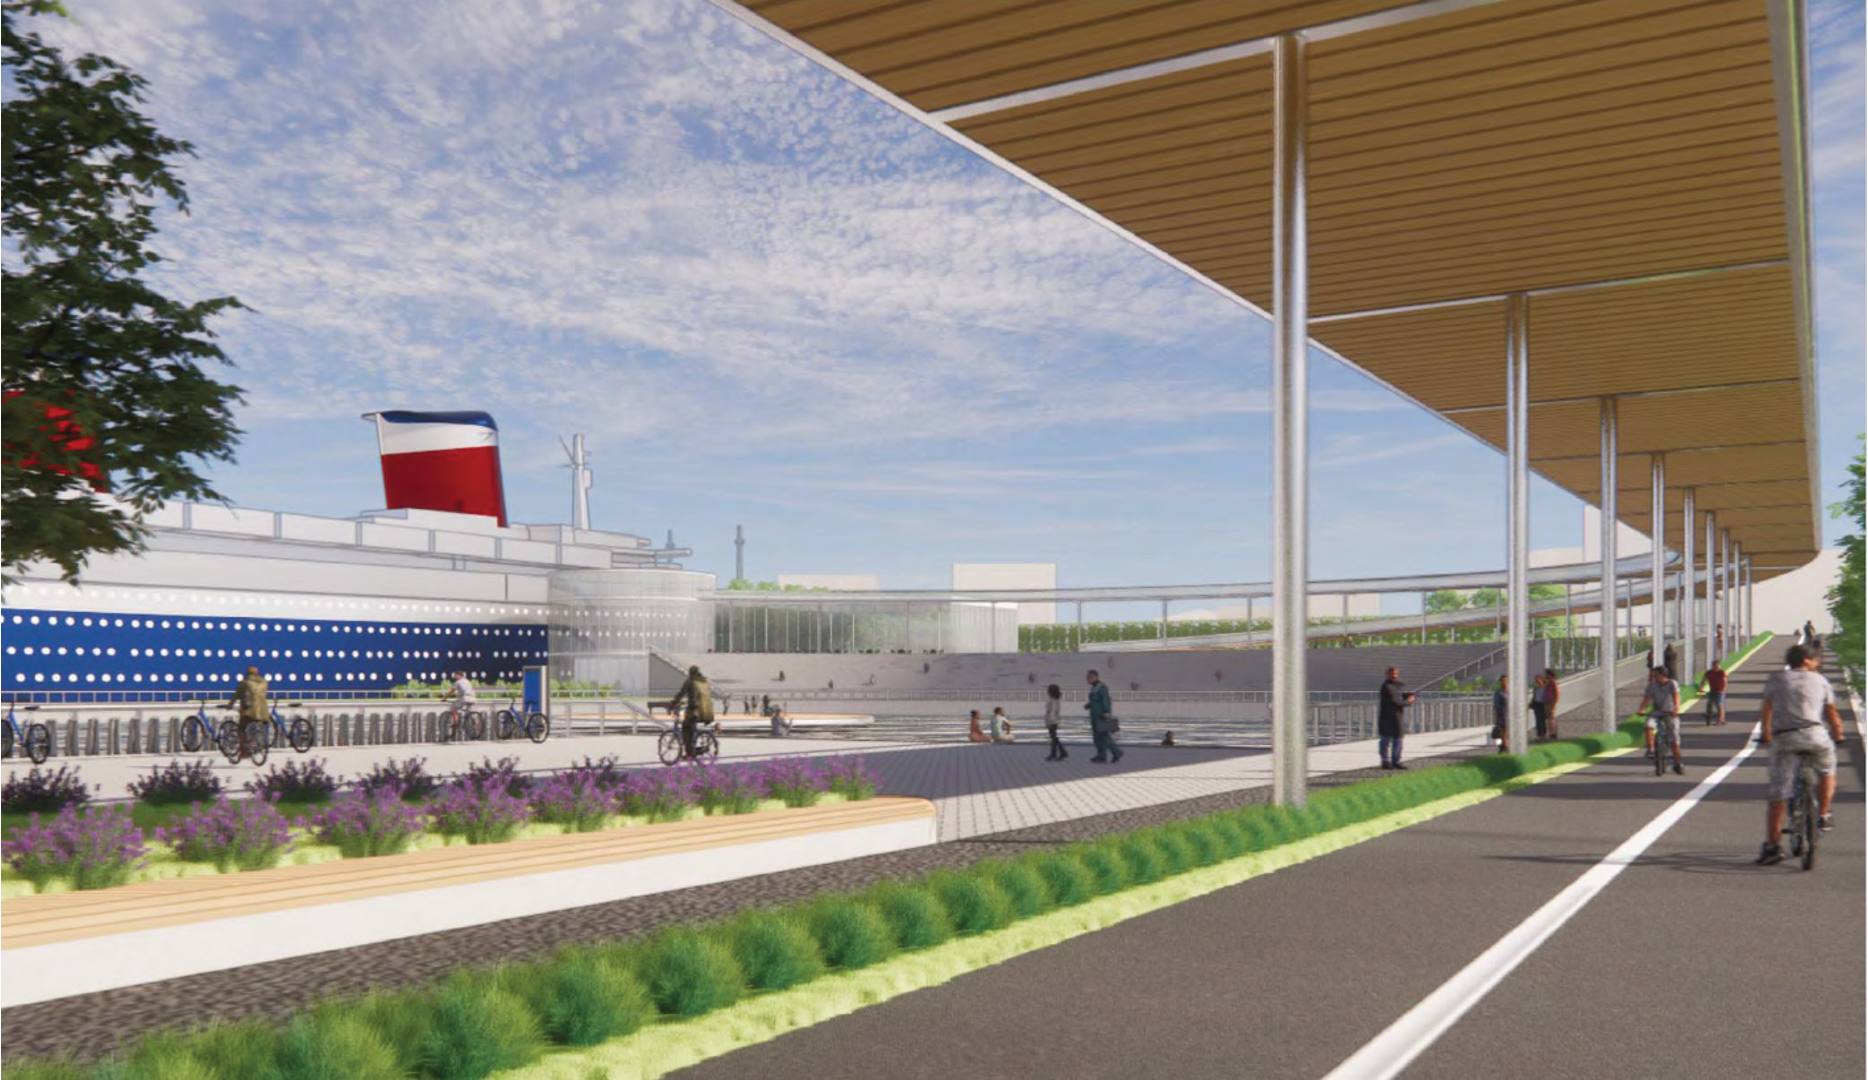 SS United States Rendering - Acres of Public Space